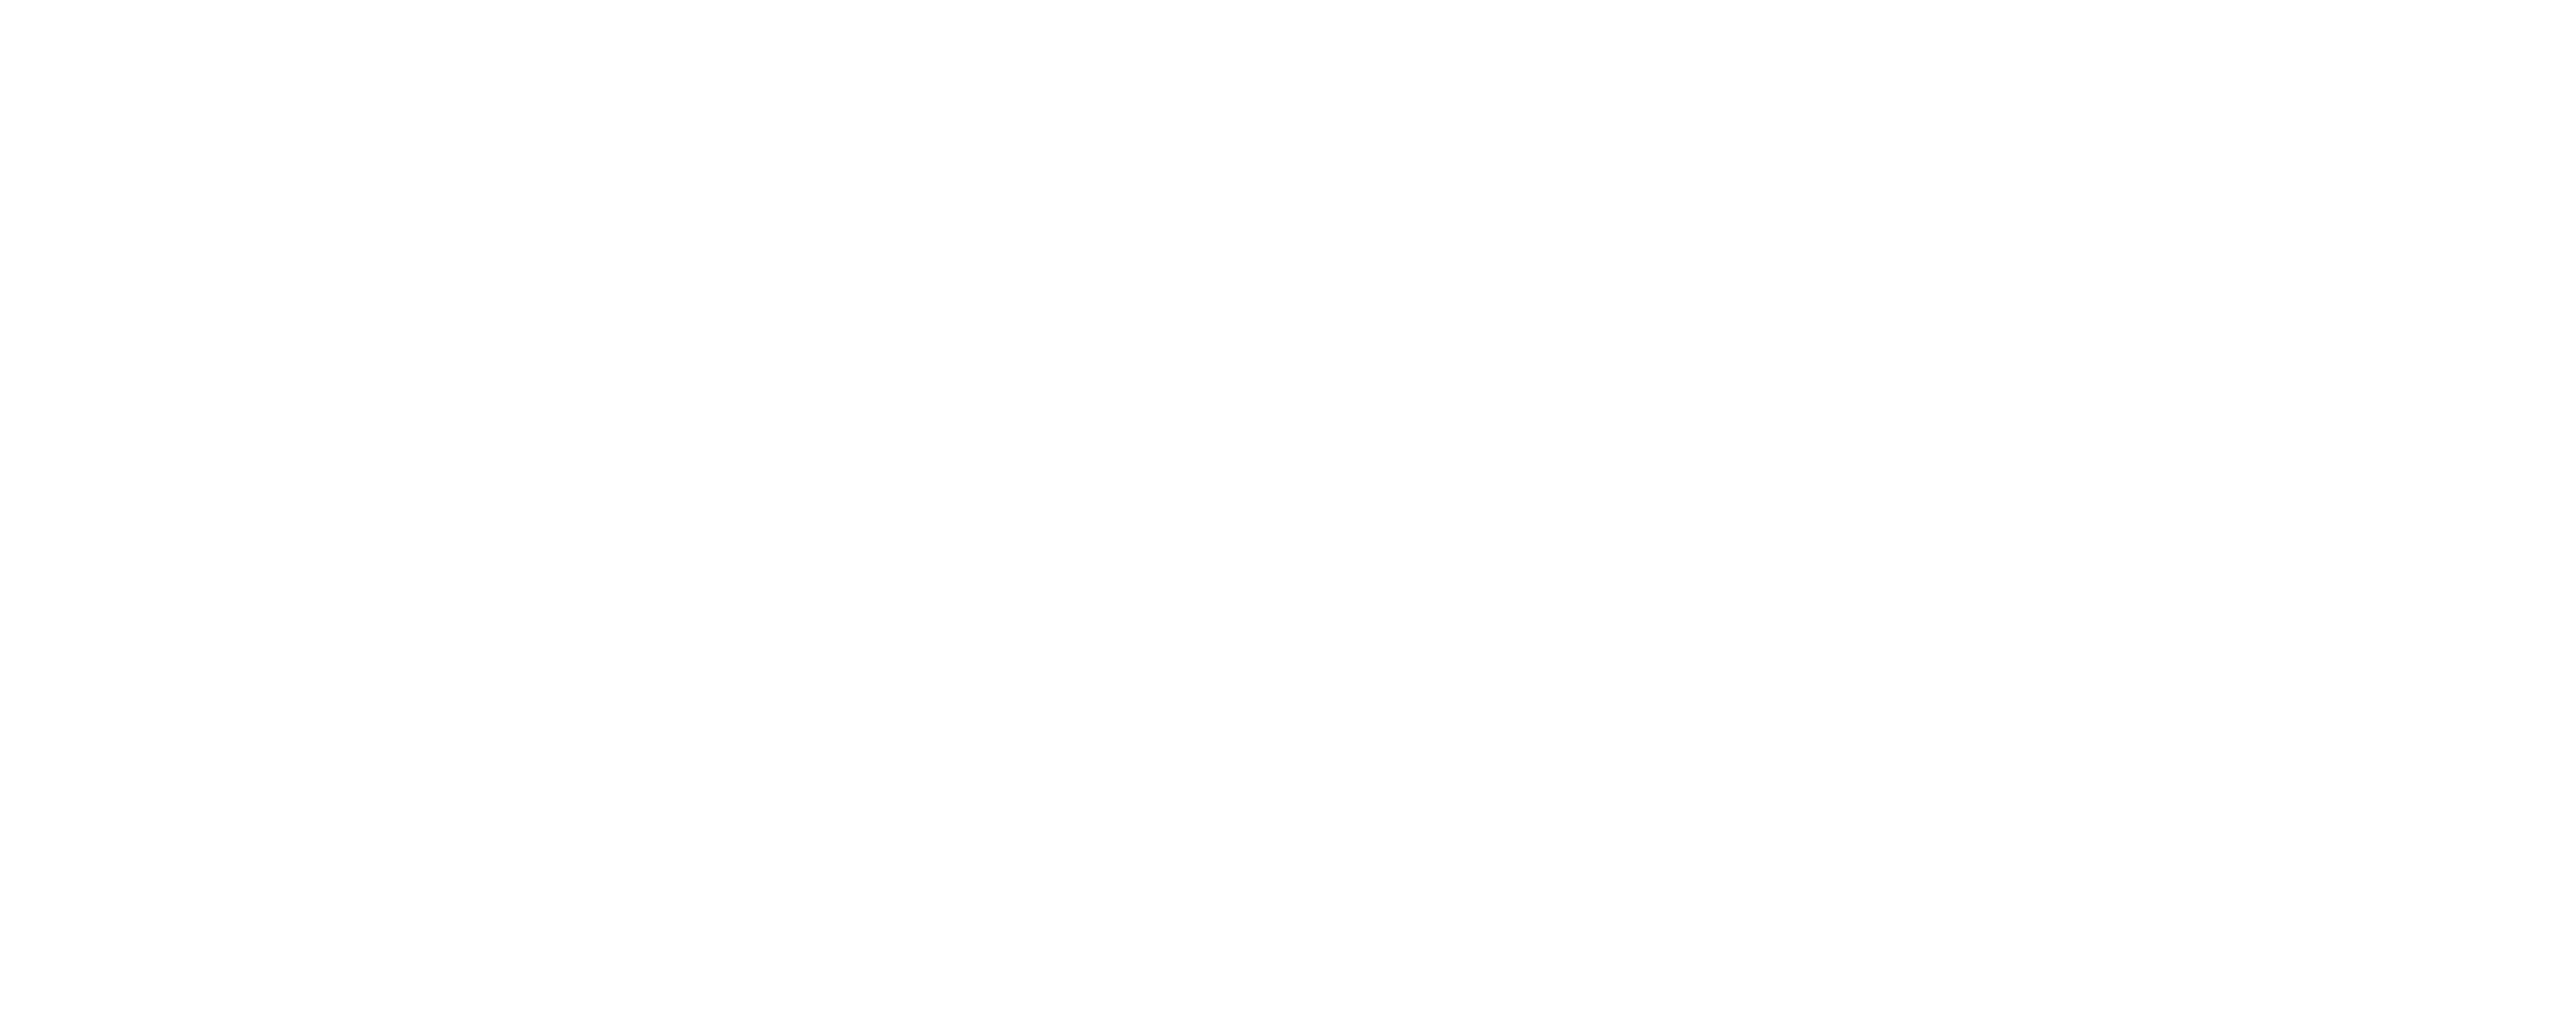 Northeast-Midwest State Foresters Alliance logo